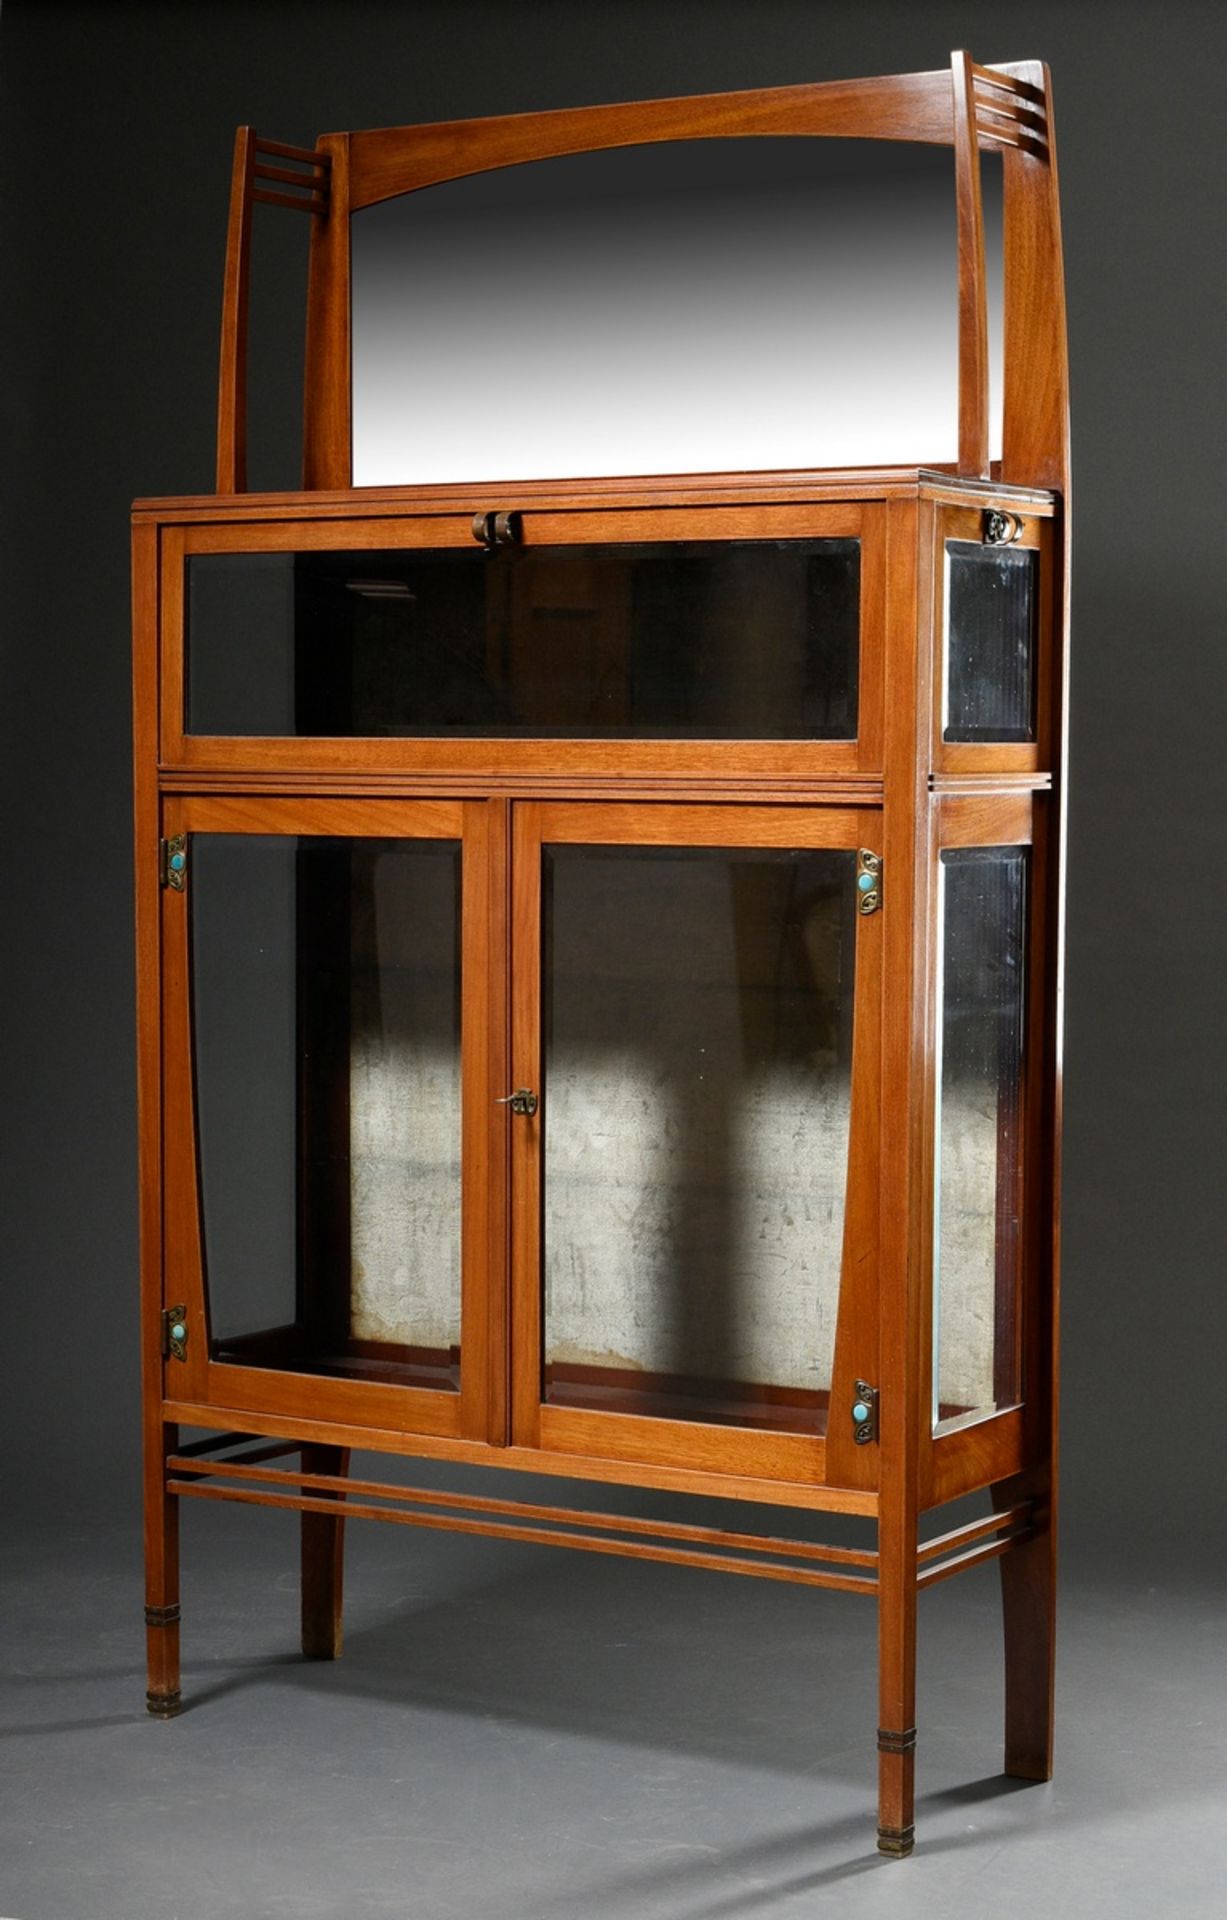 Serrurier-Bovy, Gustave (1858-1910) Art Nouveau display cabinet on slightly conical post legs with 